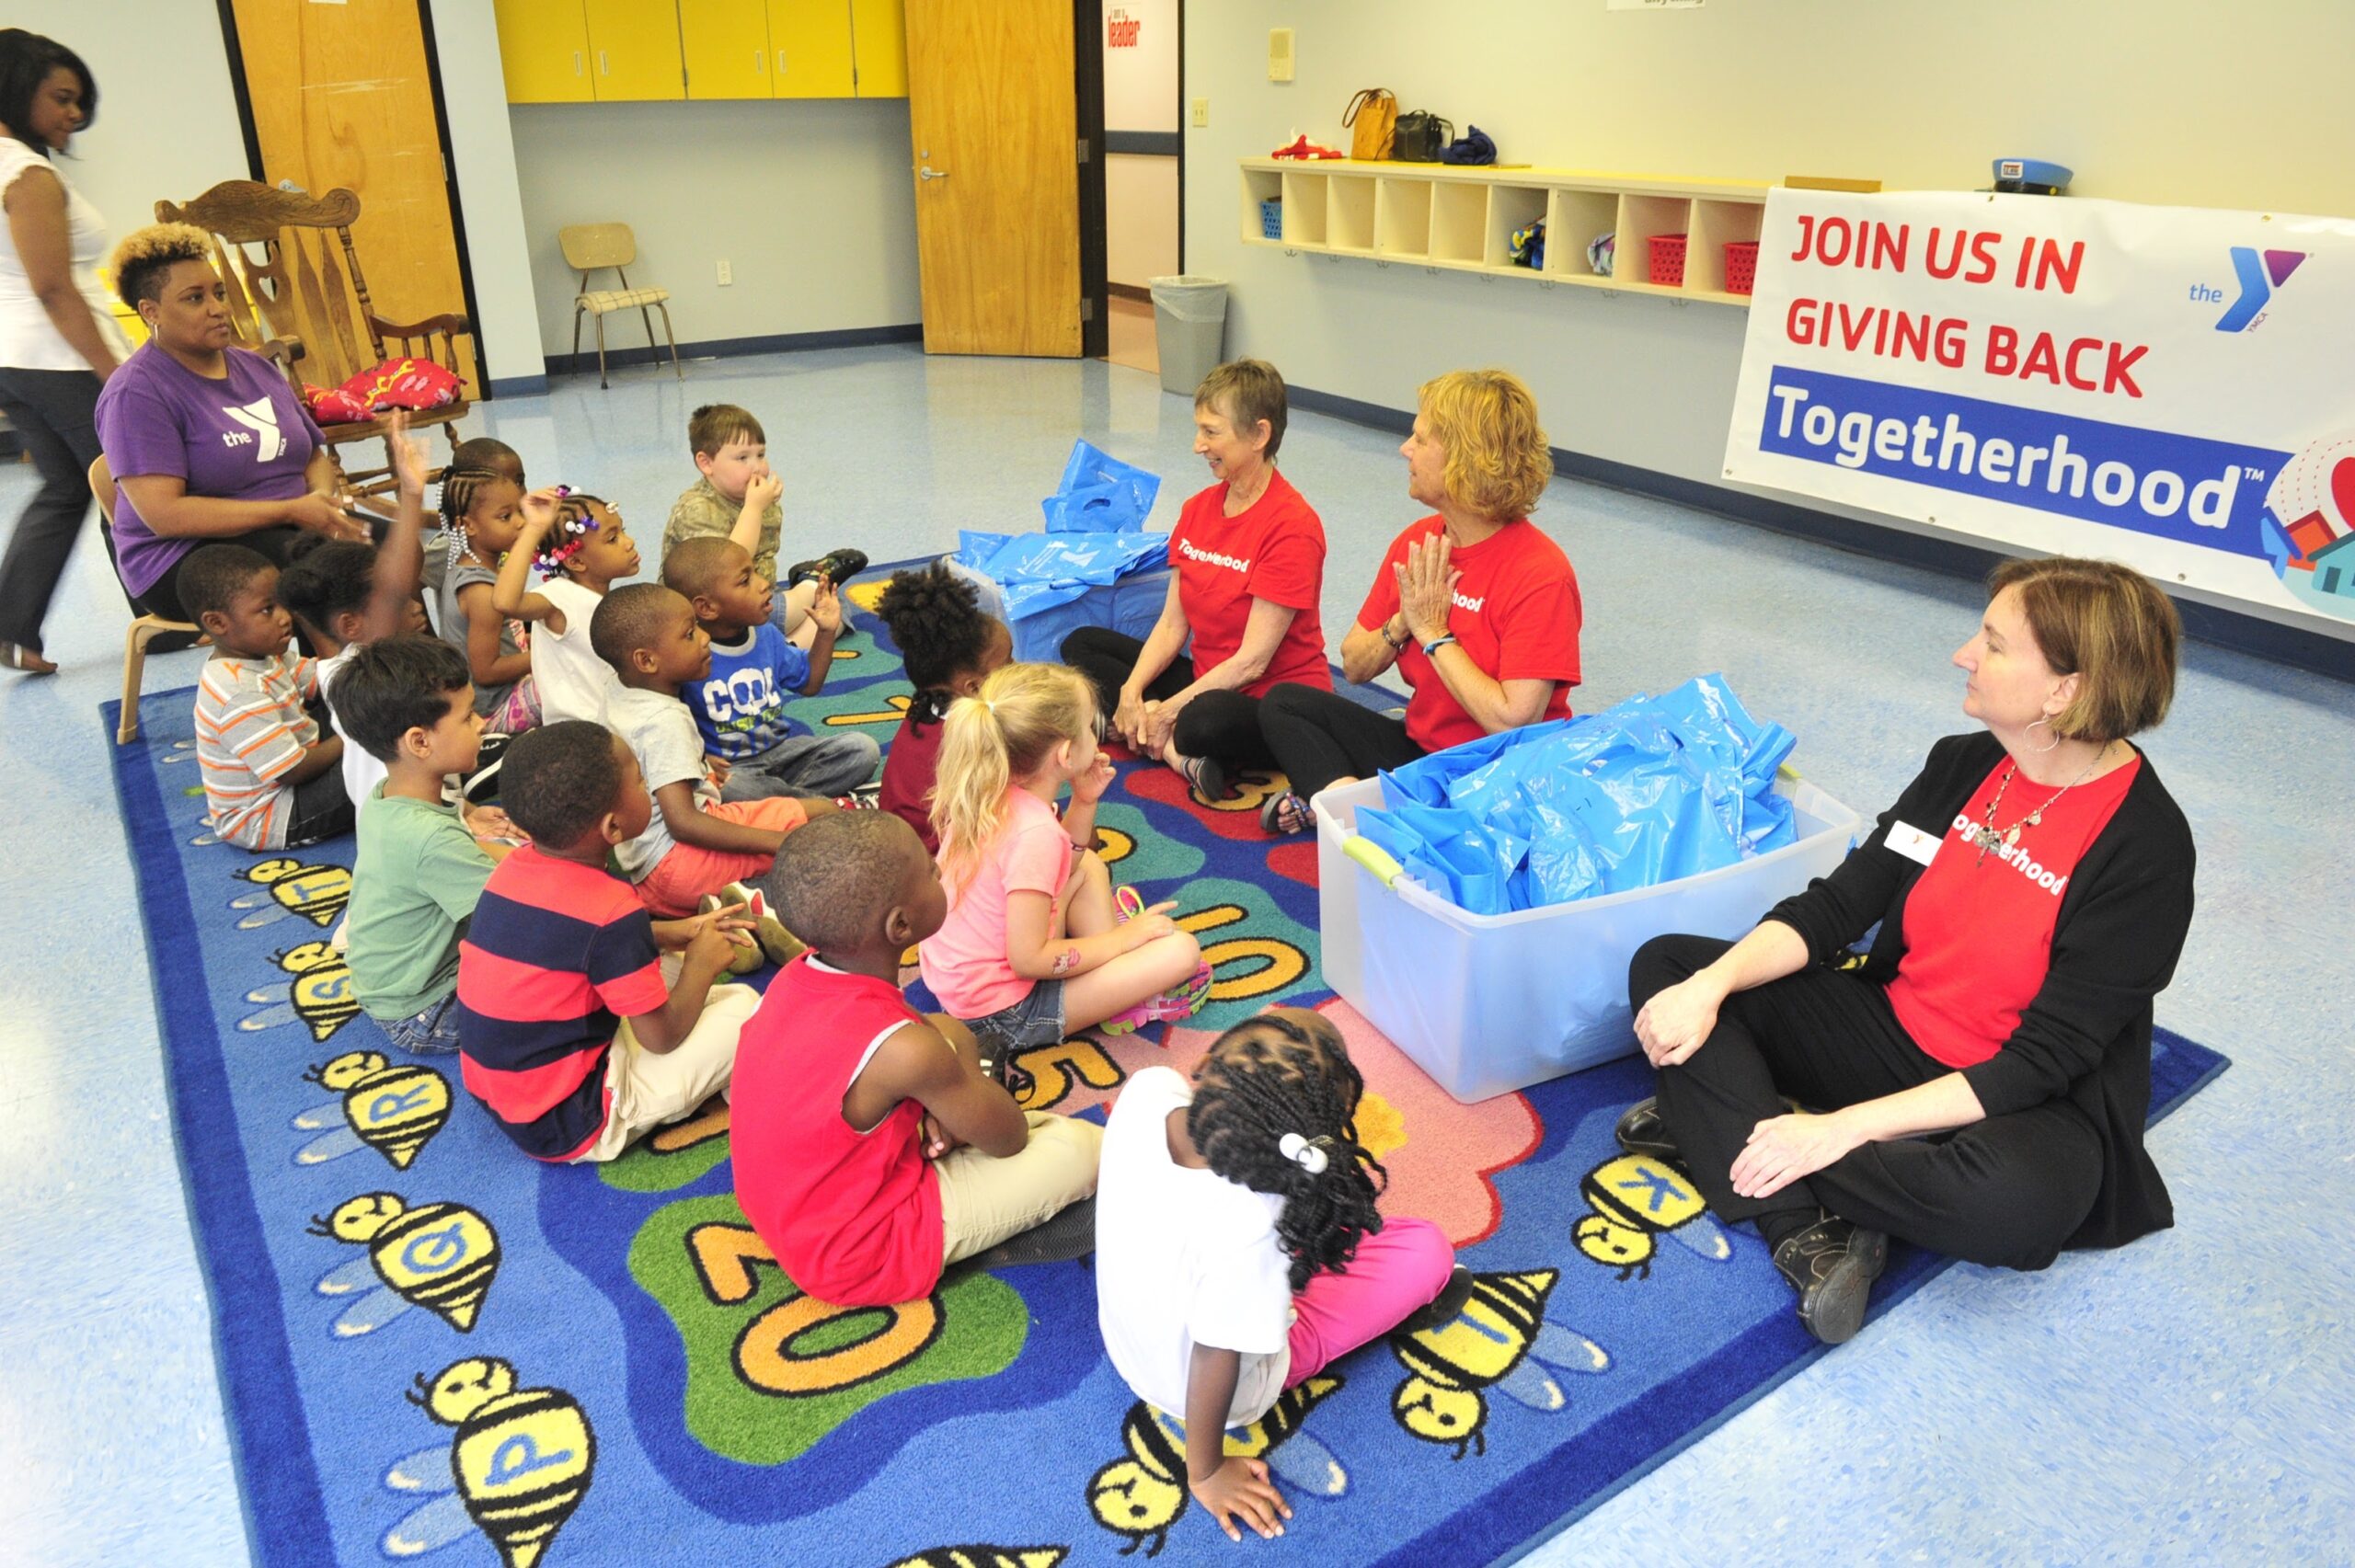 Volunteers donate six books each to the preschool students at the downtown YMCA on Monday, May 23, 2016 in Huntsville, Ala. (Eric Schultz / Rocket City Photo)